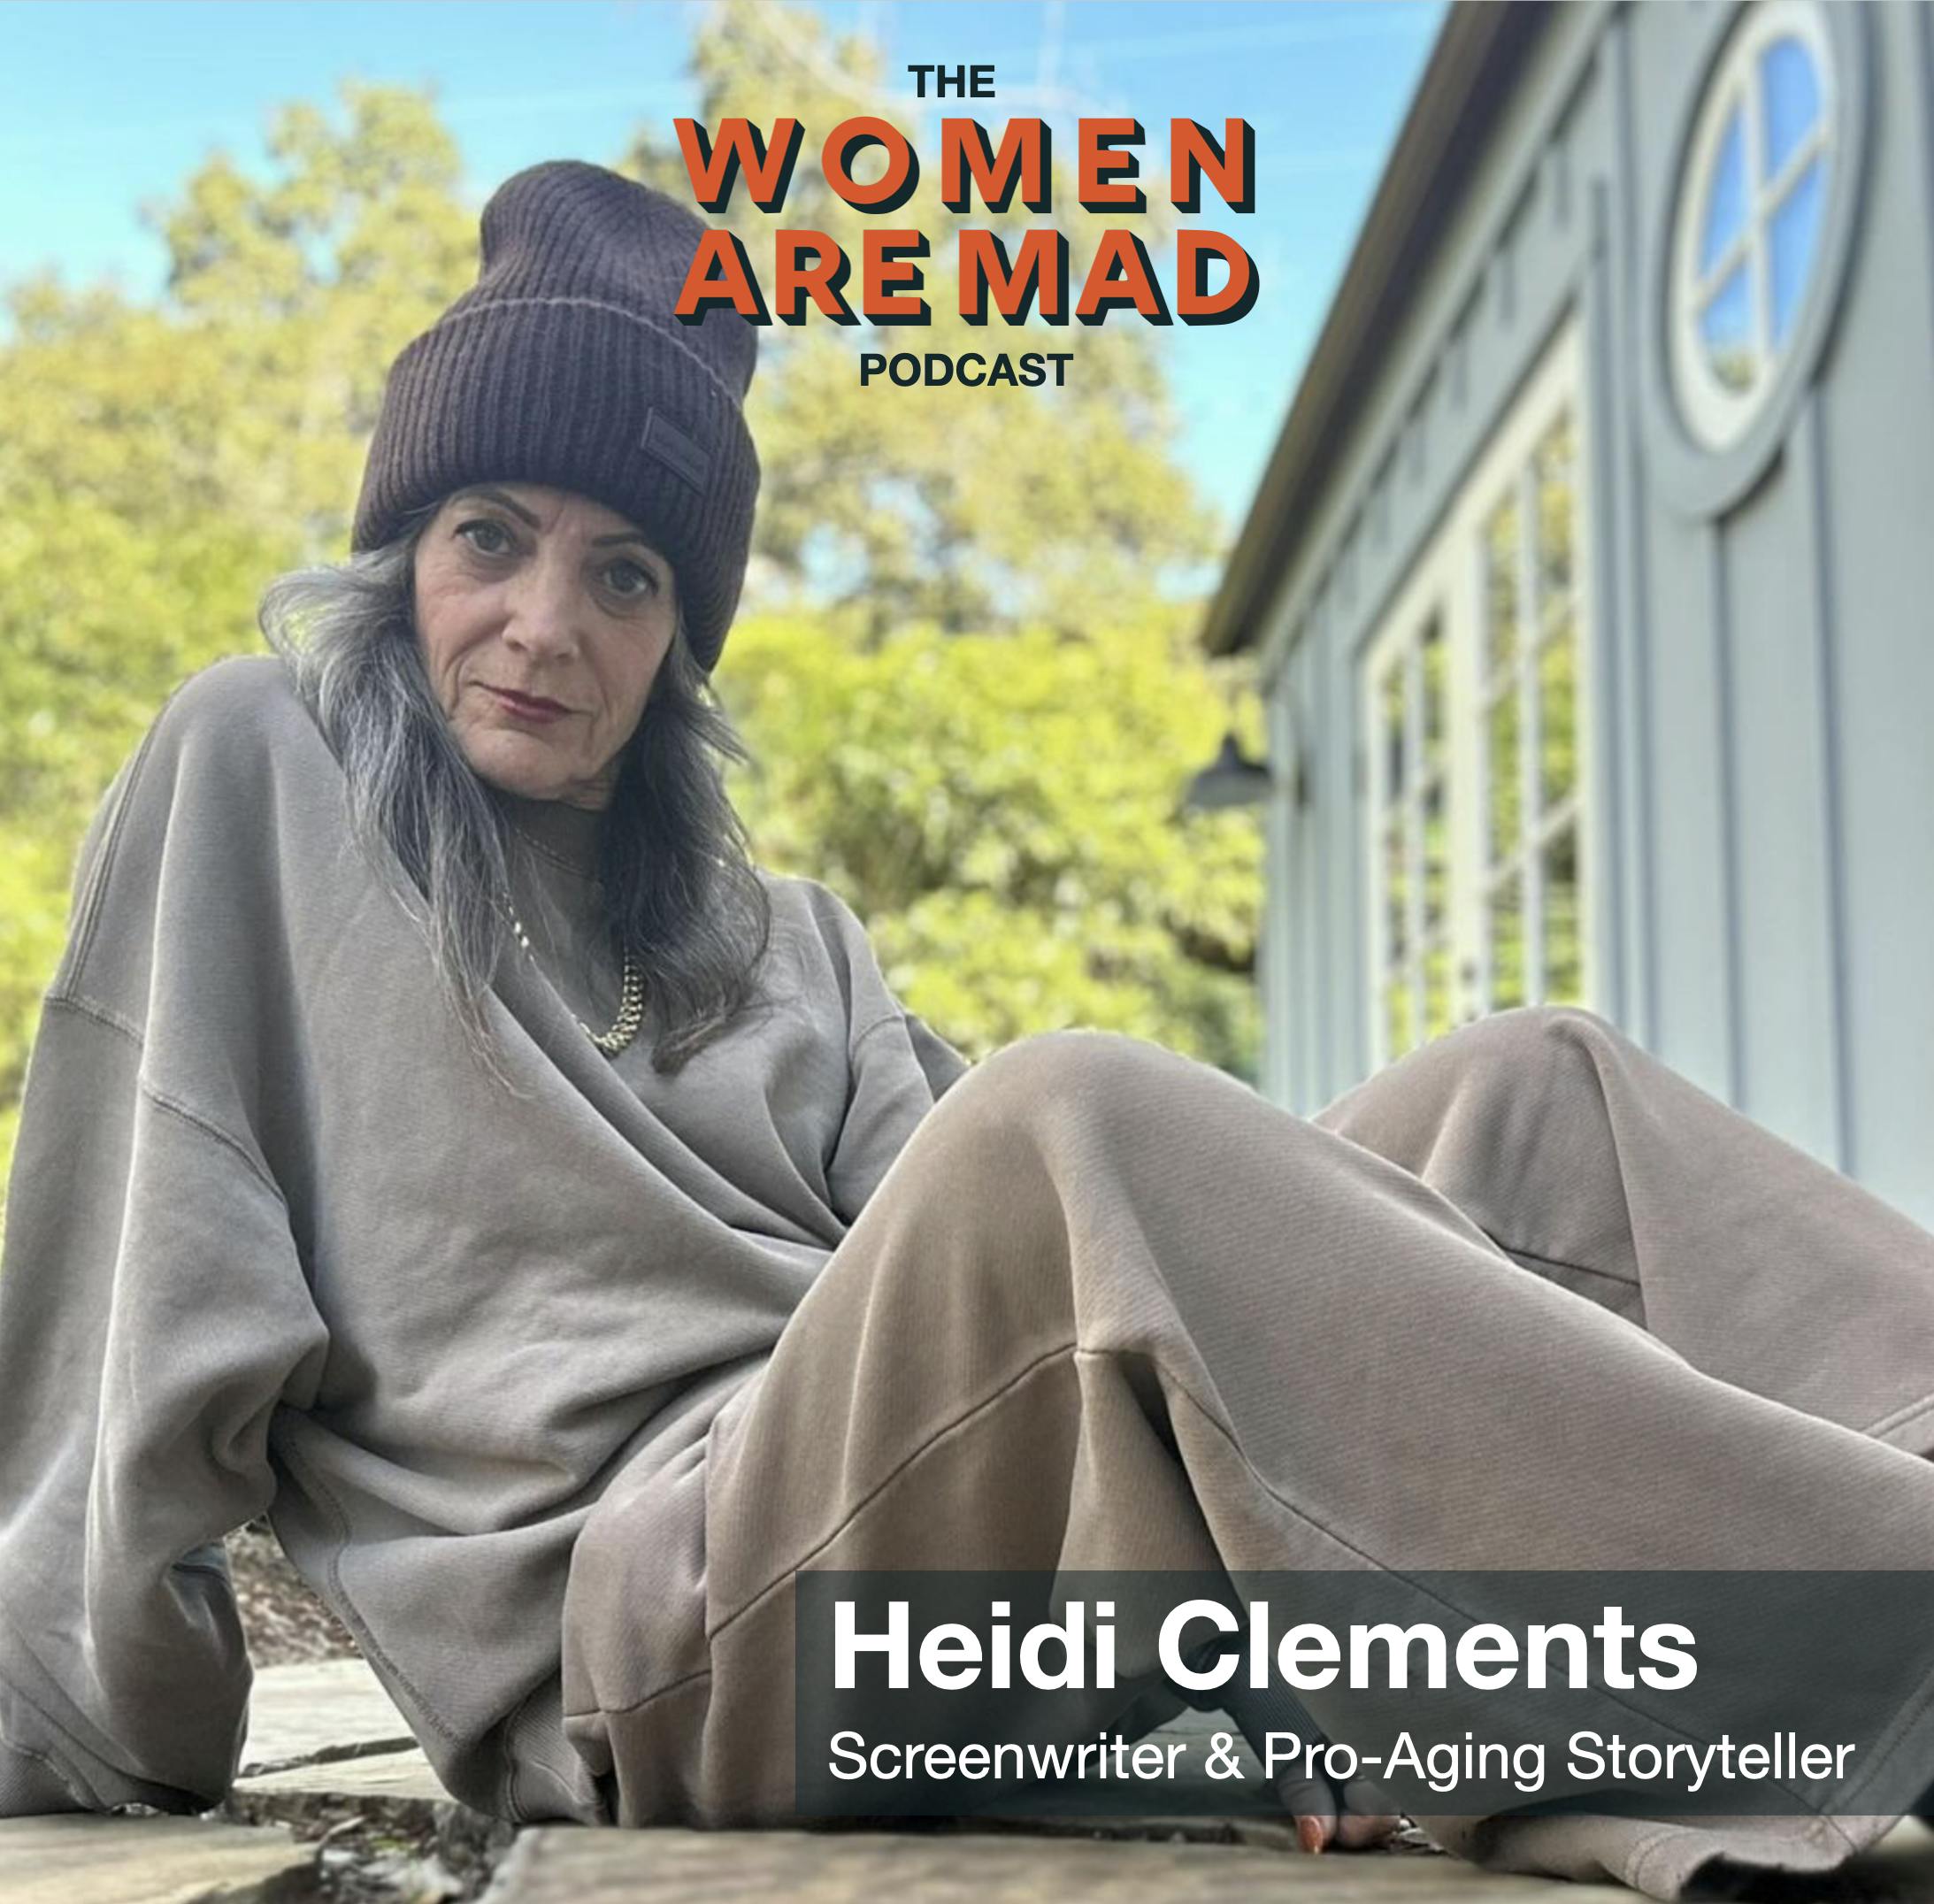 S3 E4 Heidi Clements on increasing the visibility of women over 50 and confronting conflicts head on